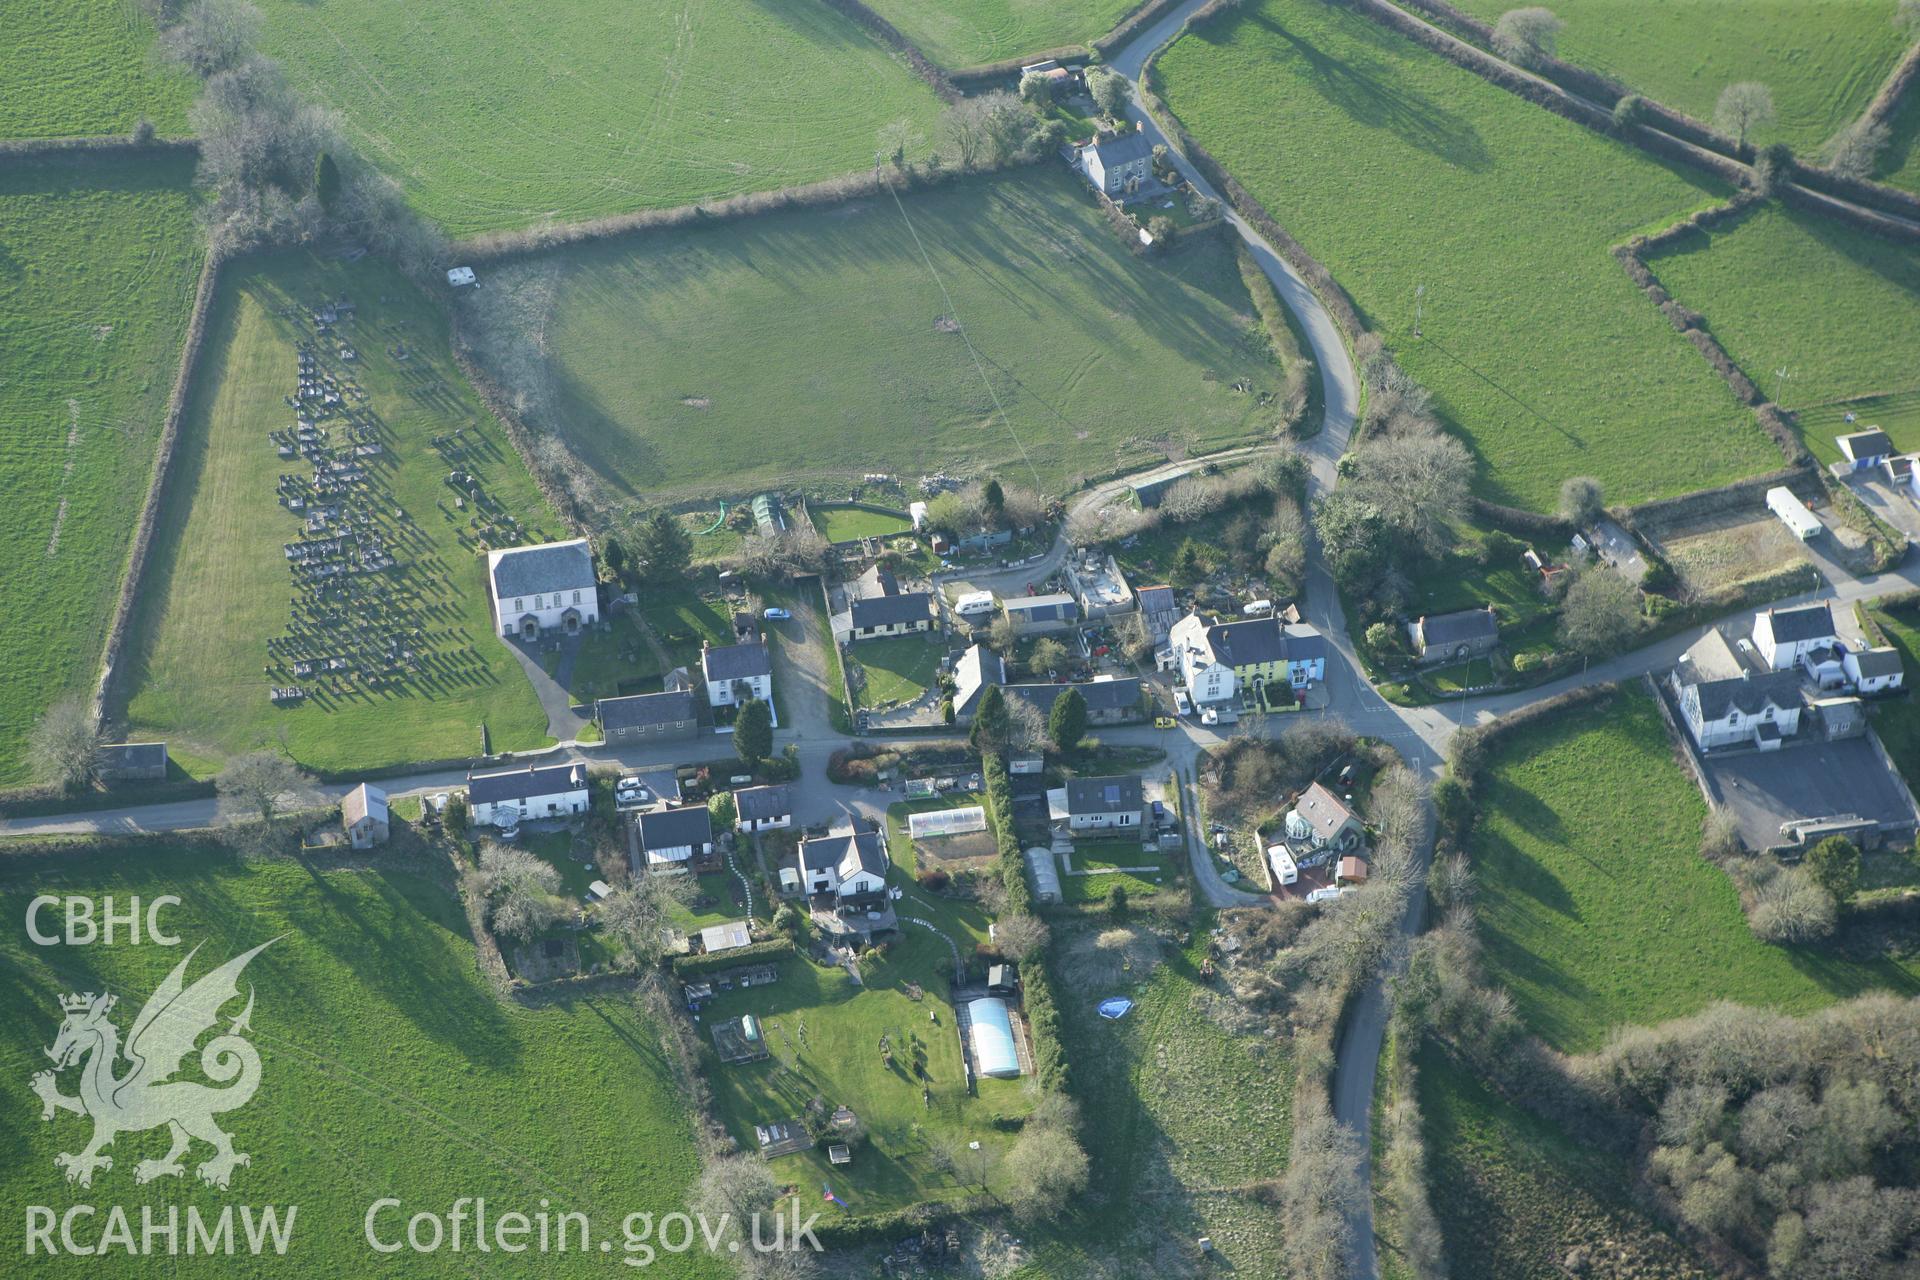 RCAHMW colour oblique aerial photograph of Tre Hywel Stone near Glan-Dwr Independent Chapel. Taken on 13 April 2010 by Toby Driver